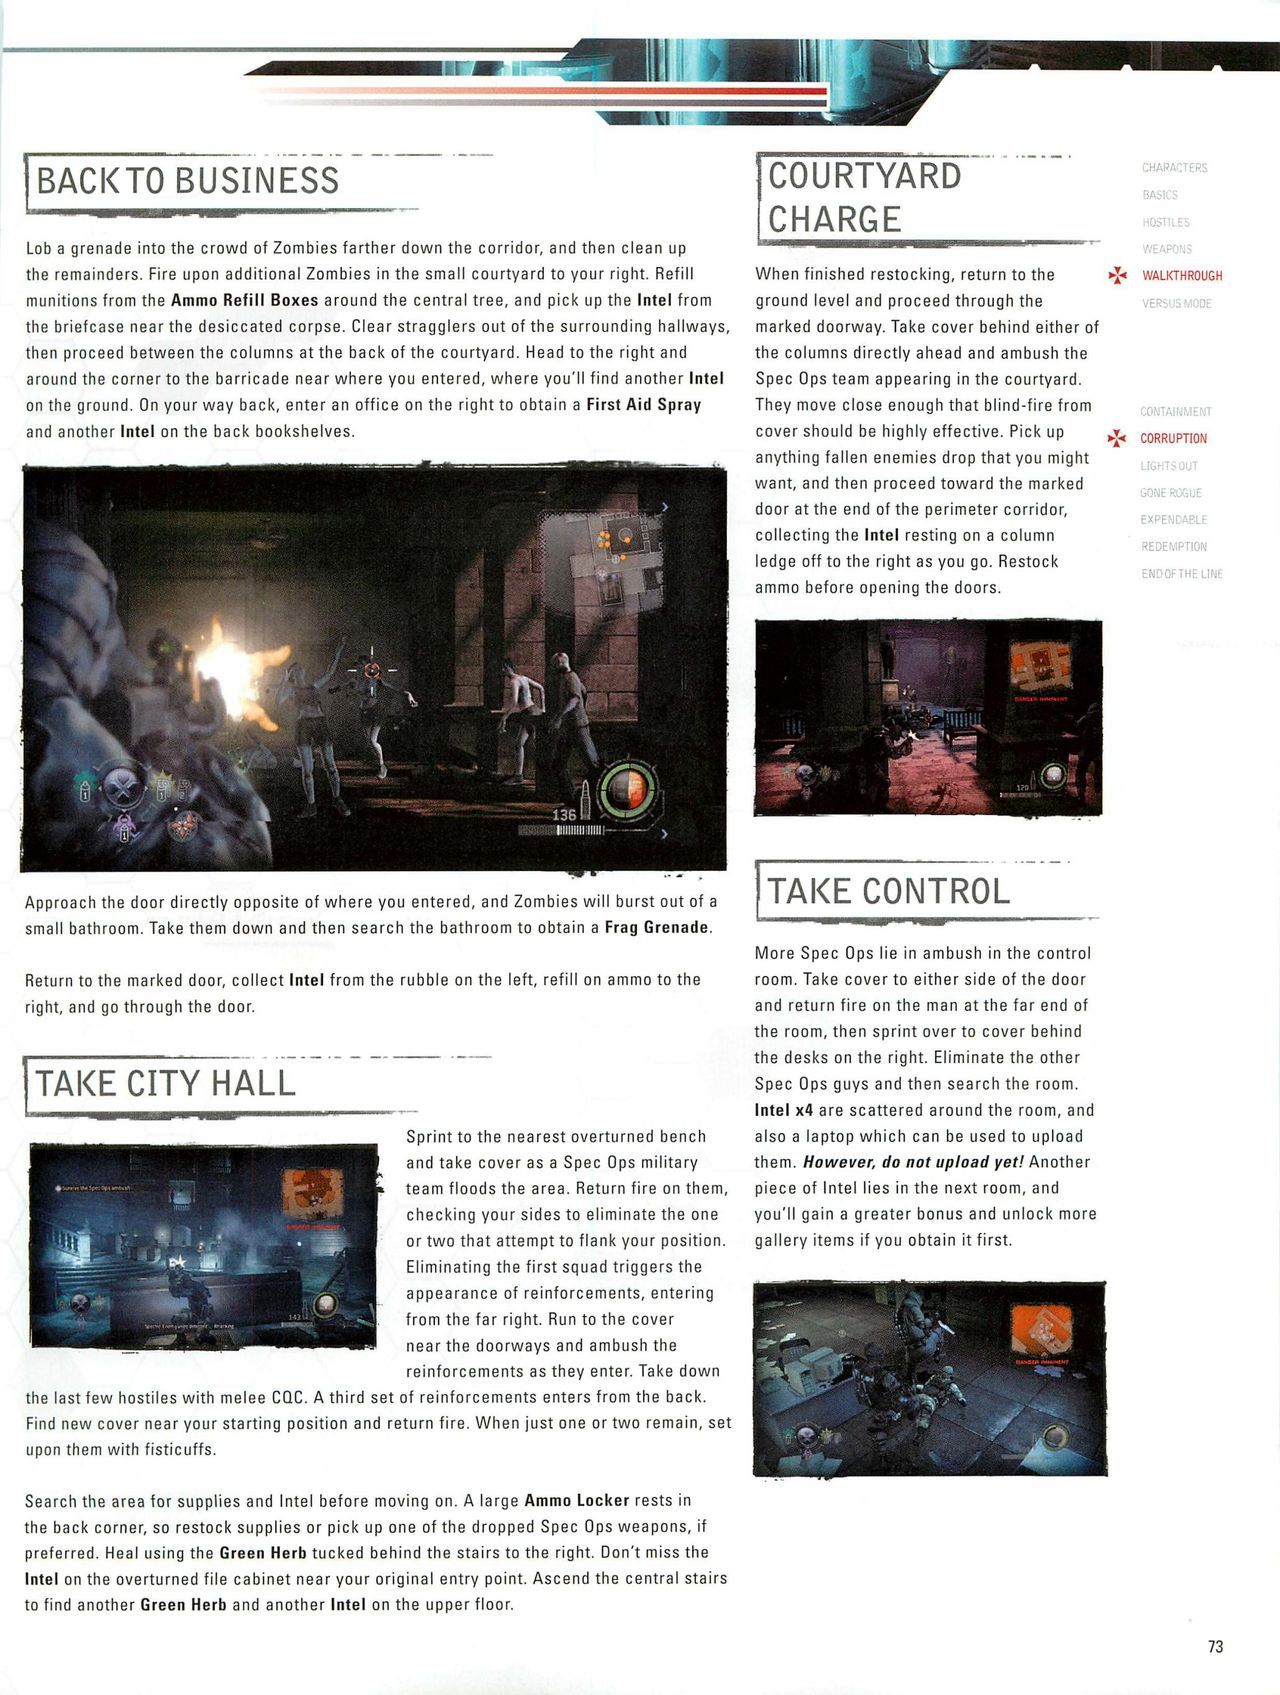 Resident Evil: Operation Raccoon City Official Strategy Guide (watermarked) 75